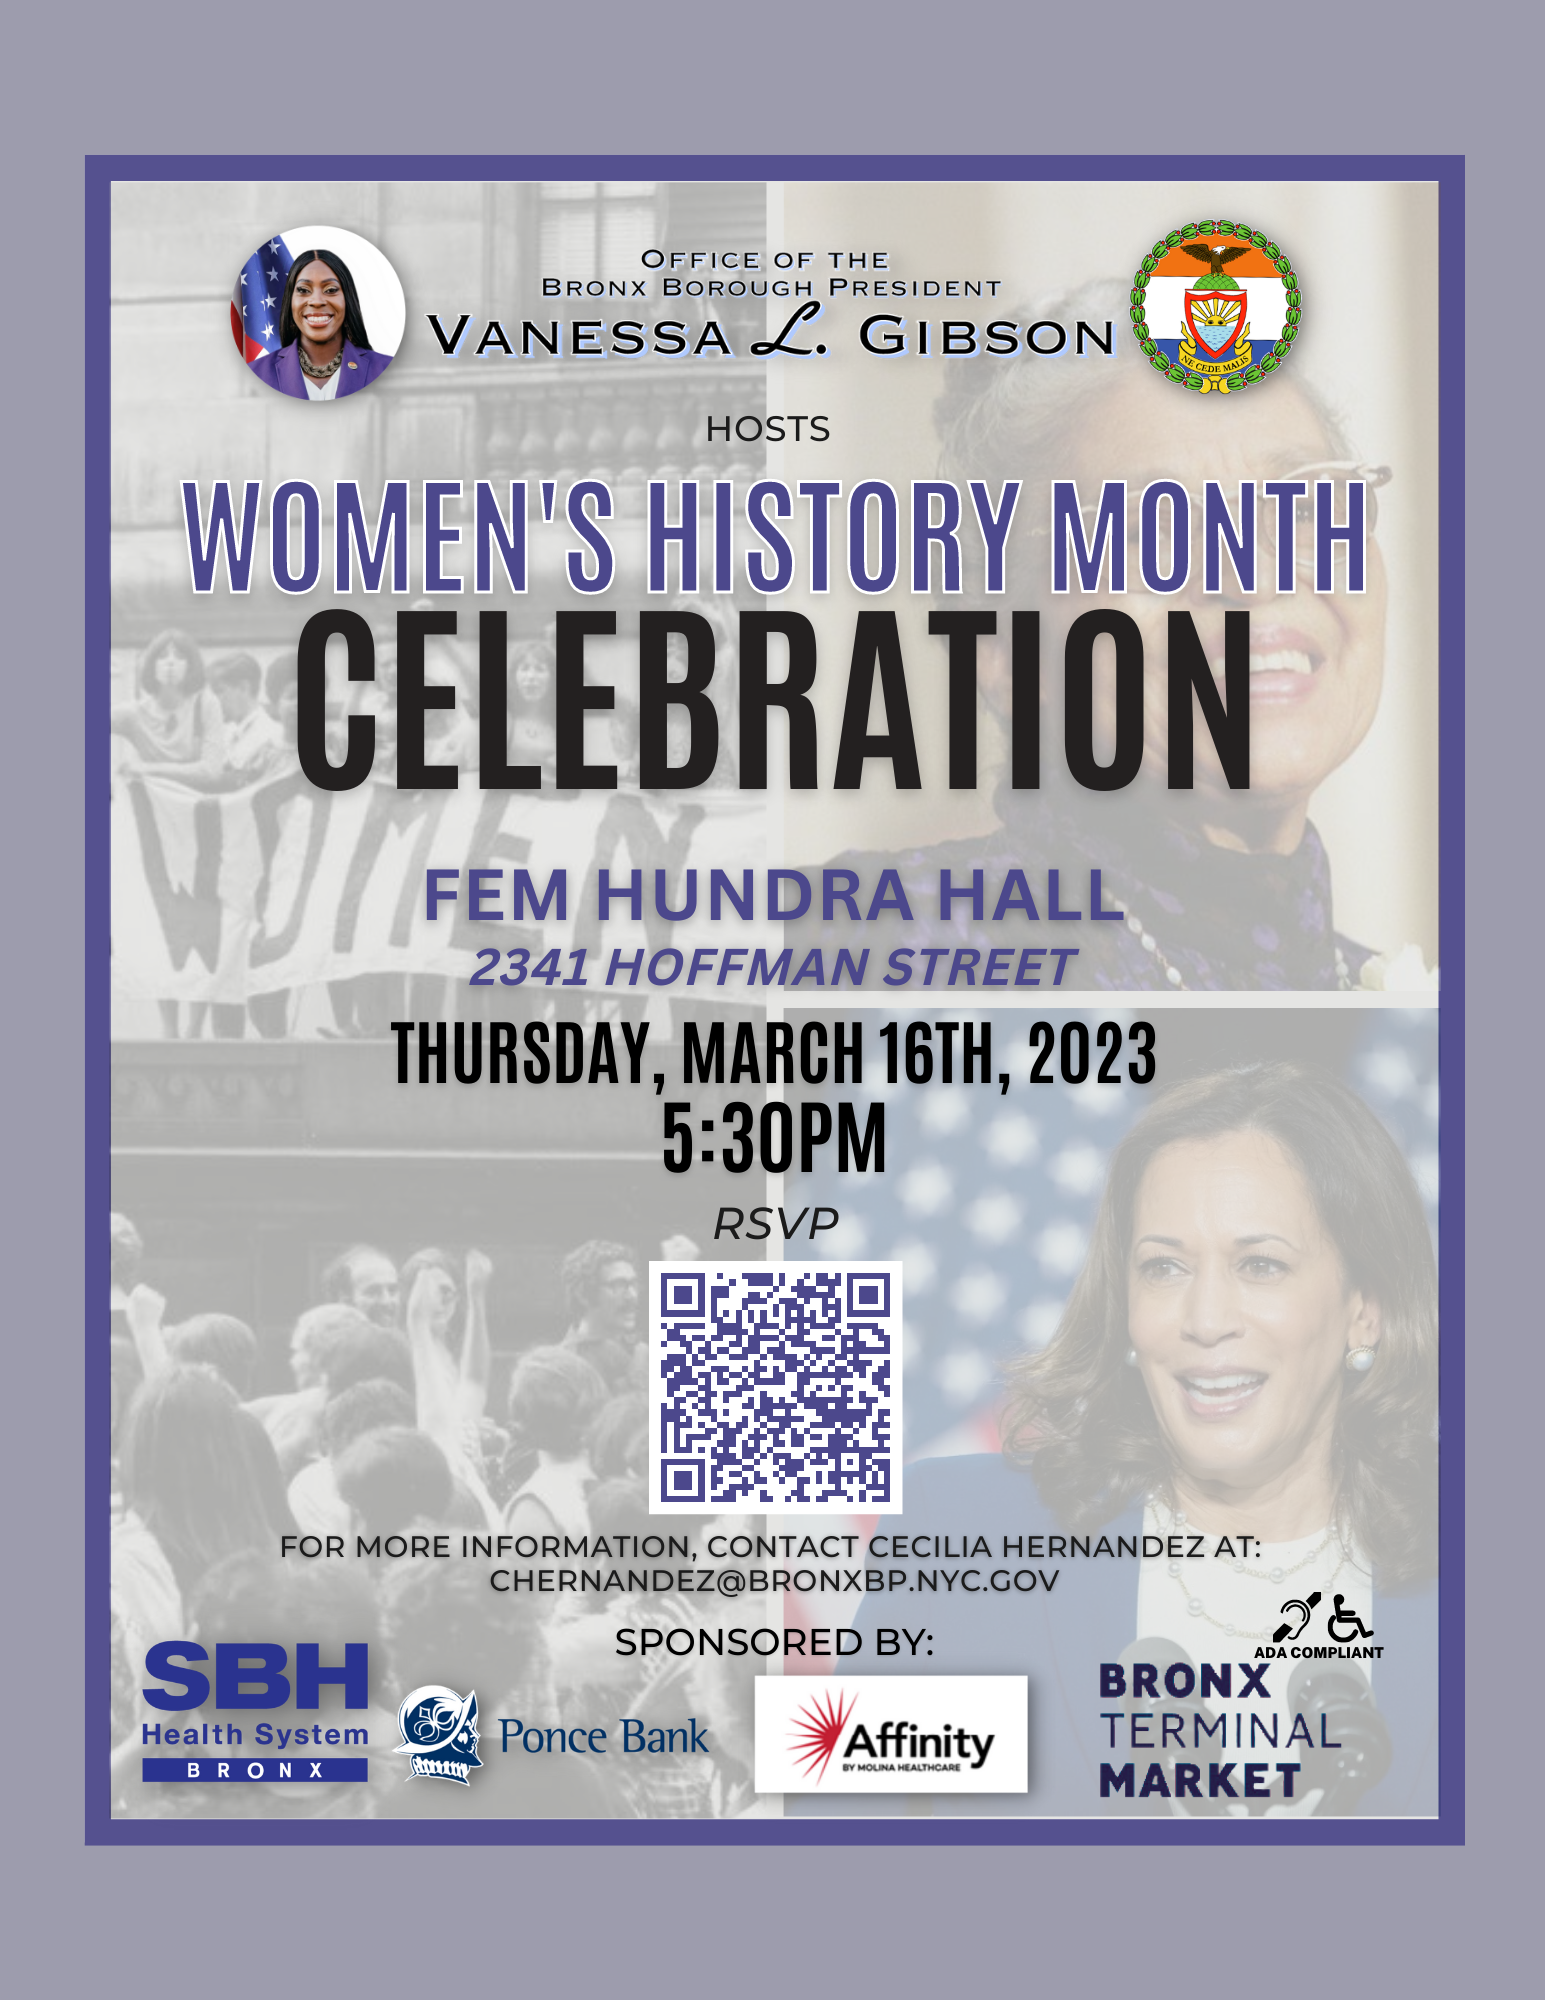 Flyer for Women's History Month Celebration - contact chernandez@bronxbp.nyc.gov for more information